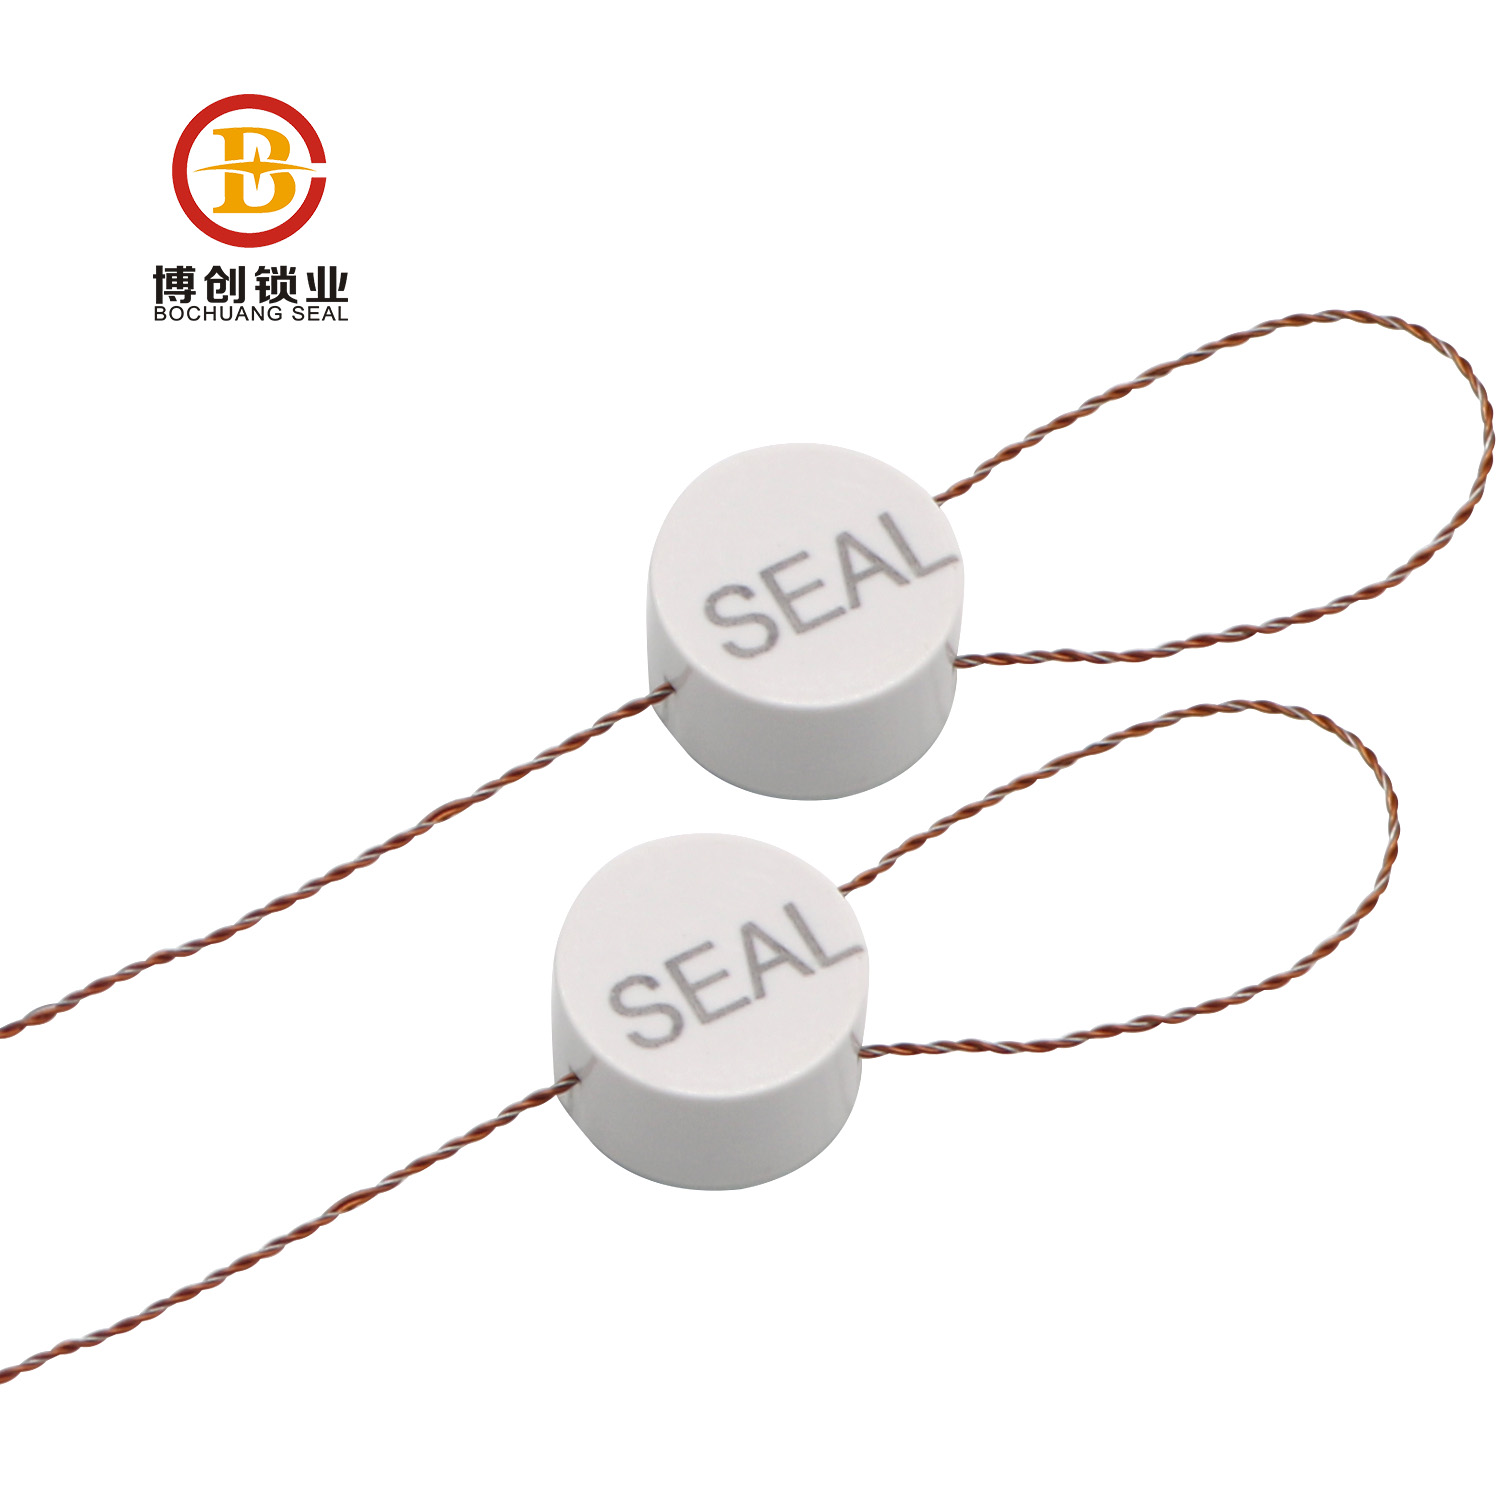 BCM201 High quality tamper proof electric meter security seals